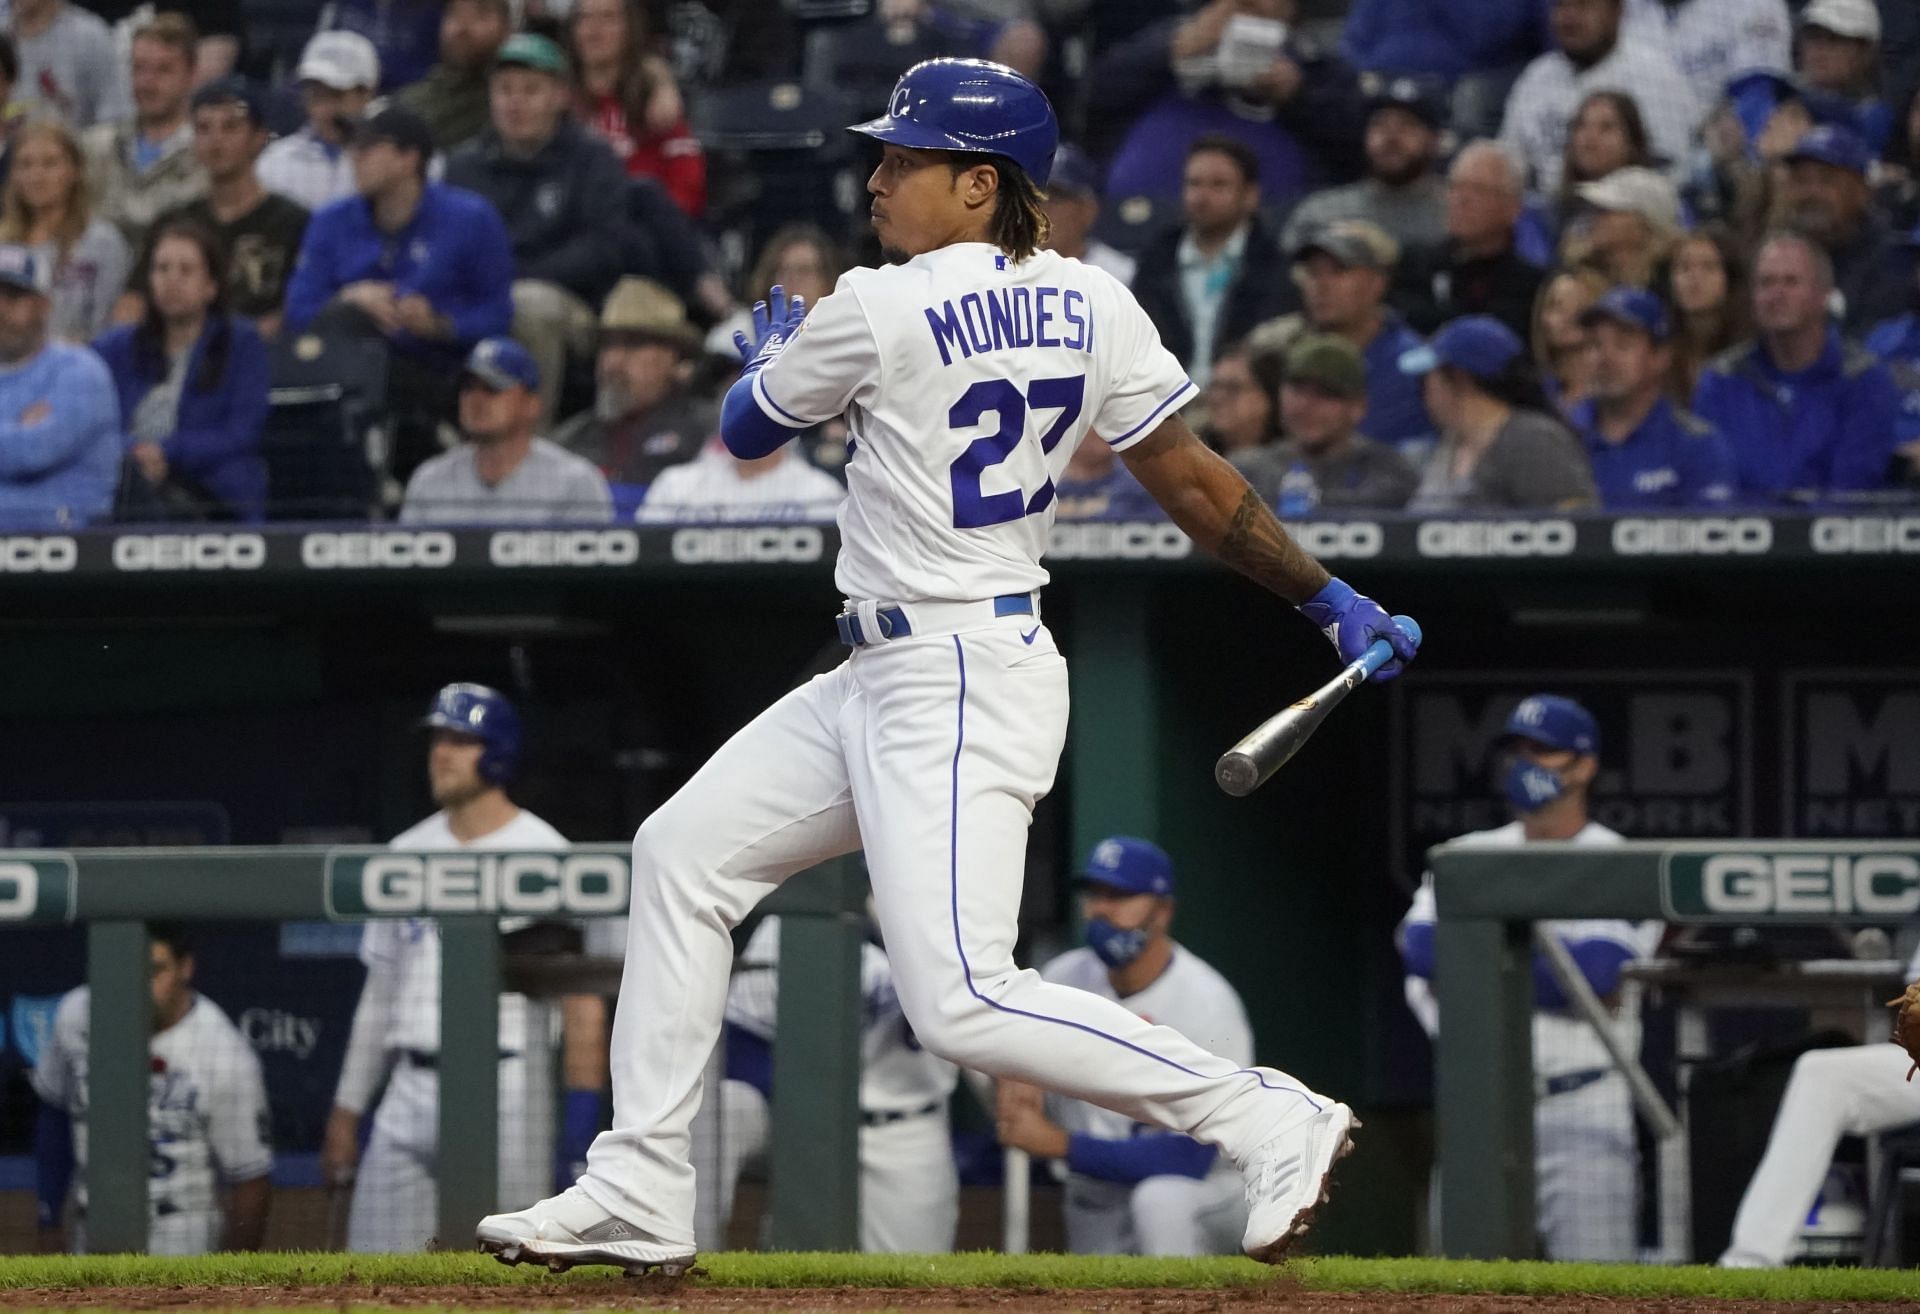 Could the Red Sox go after Adalberto Mondesi?